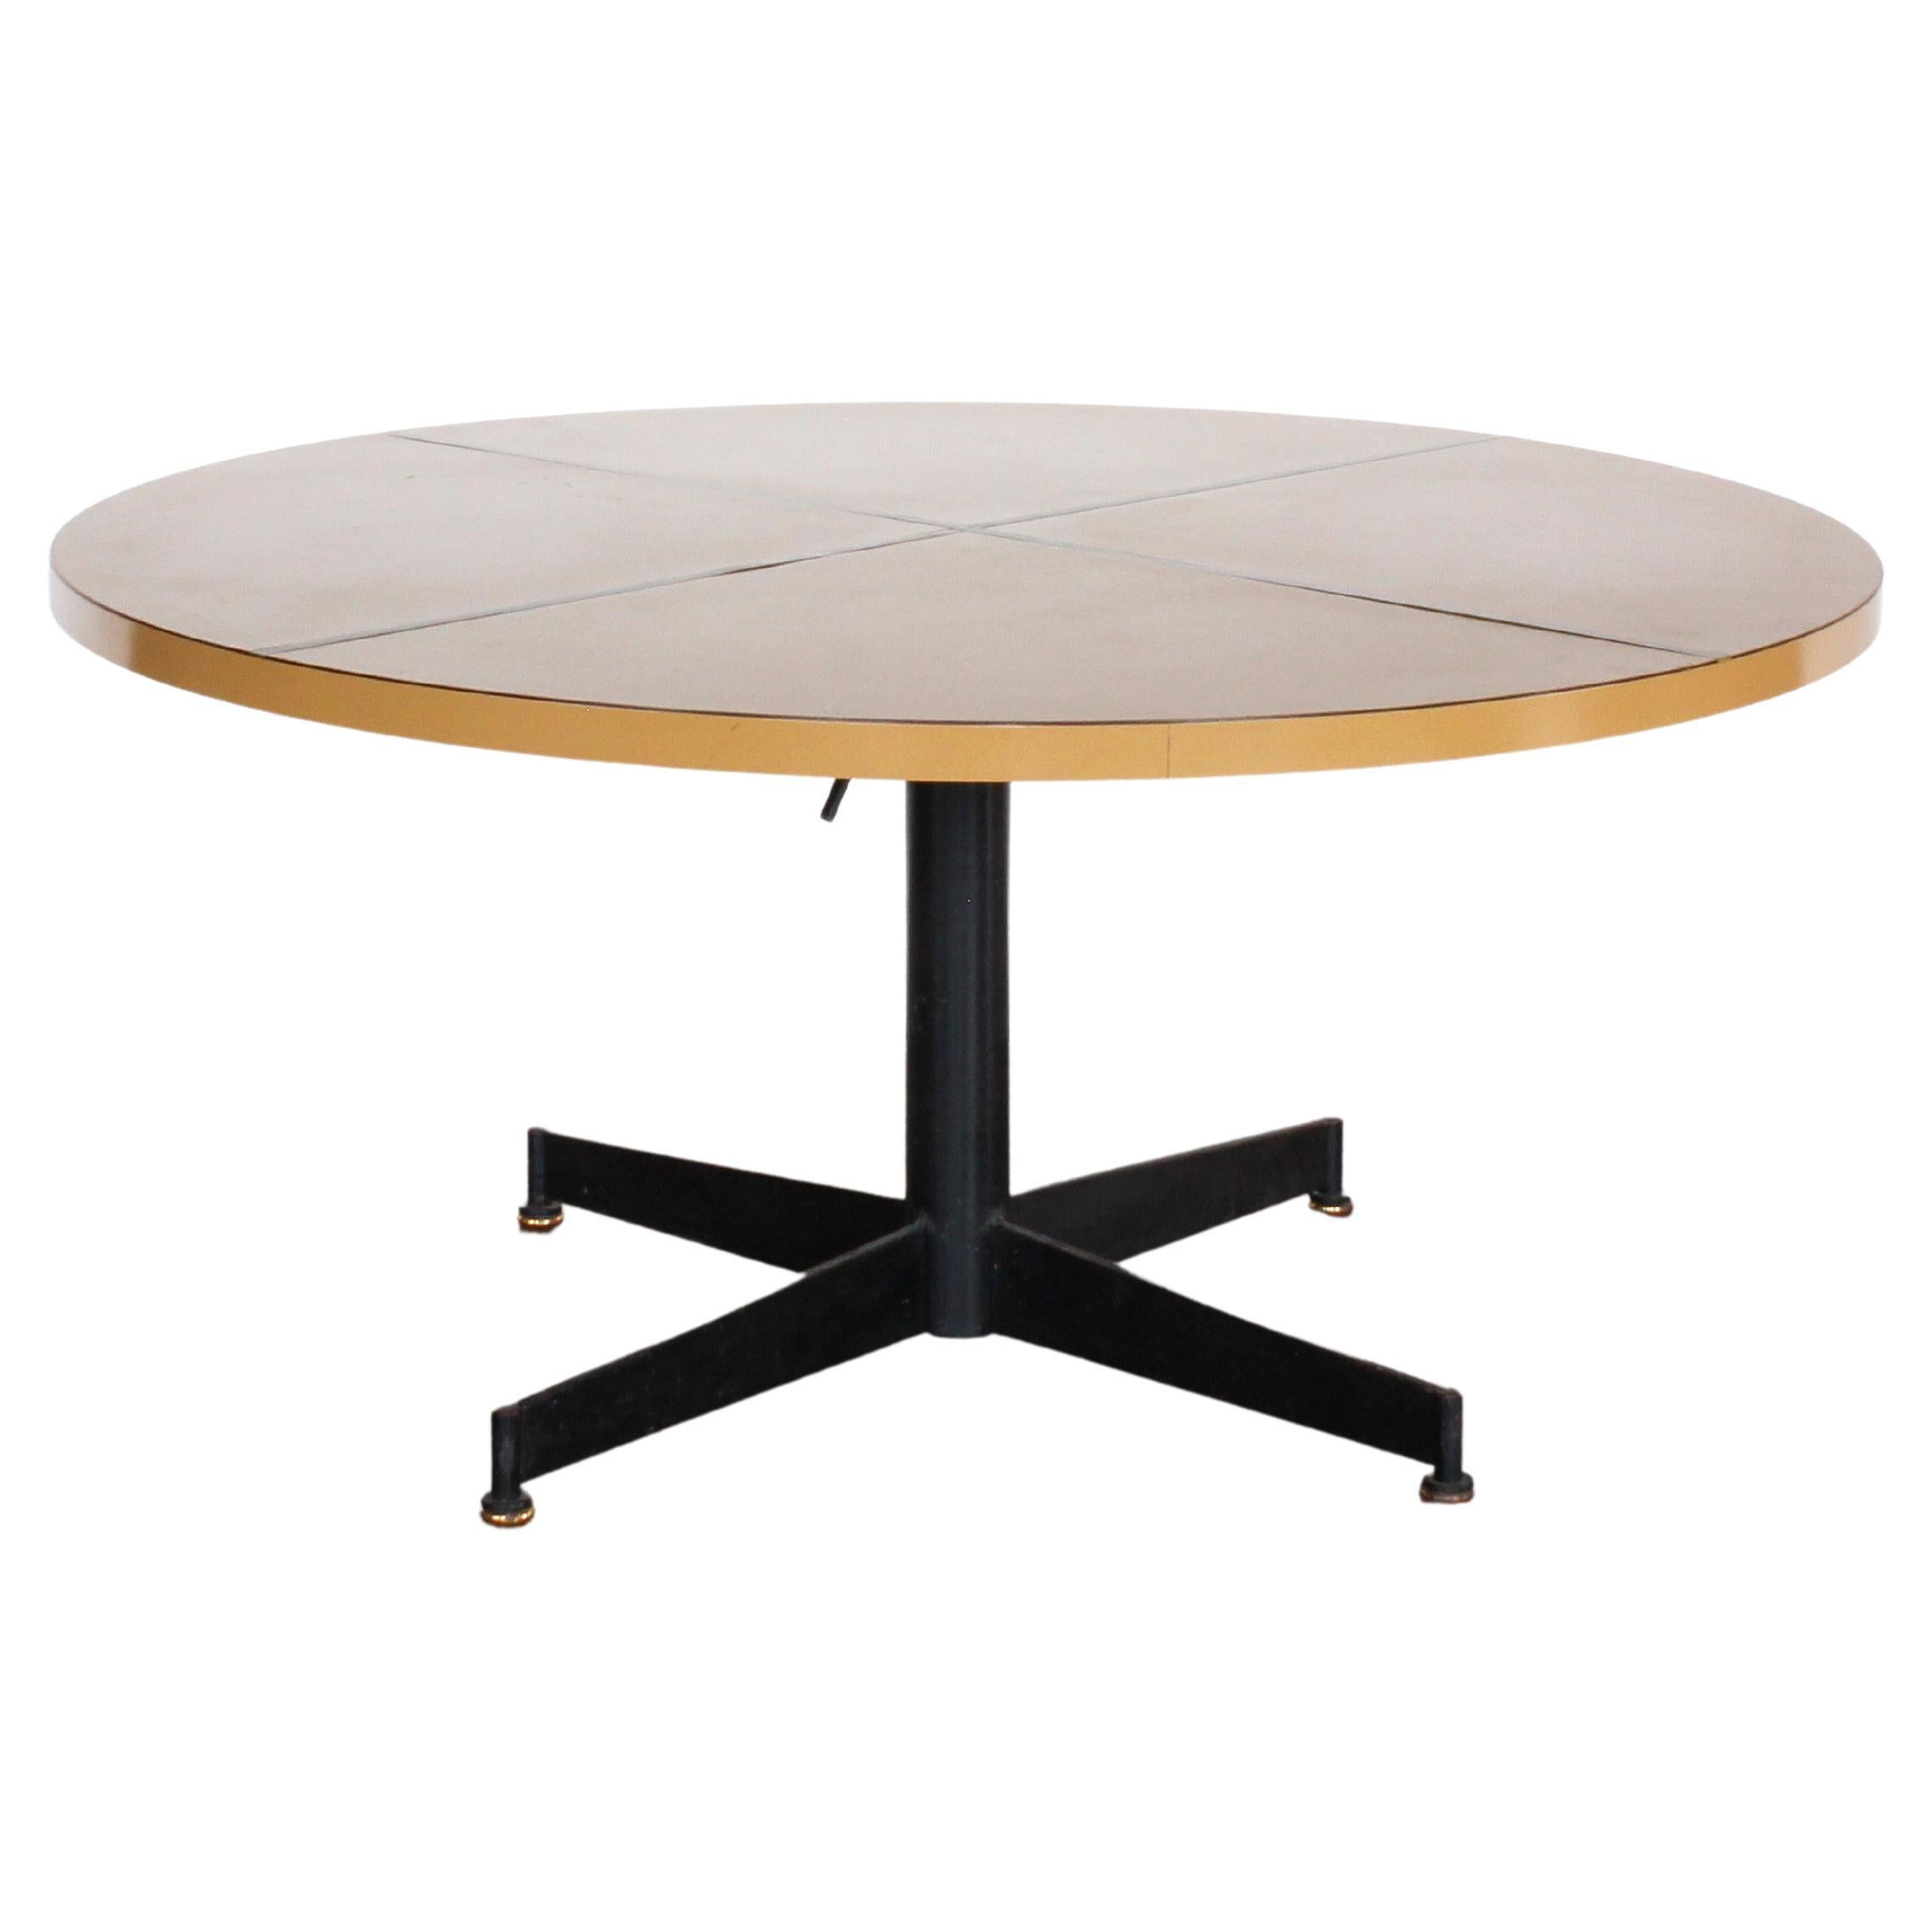 Mid-Century Modern Blackened Iron & Melamine Table with Brass Inlay, c. 1960 For Sale